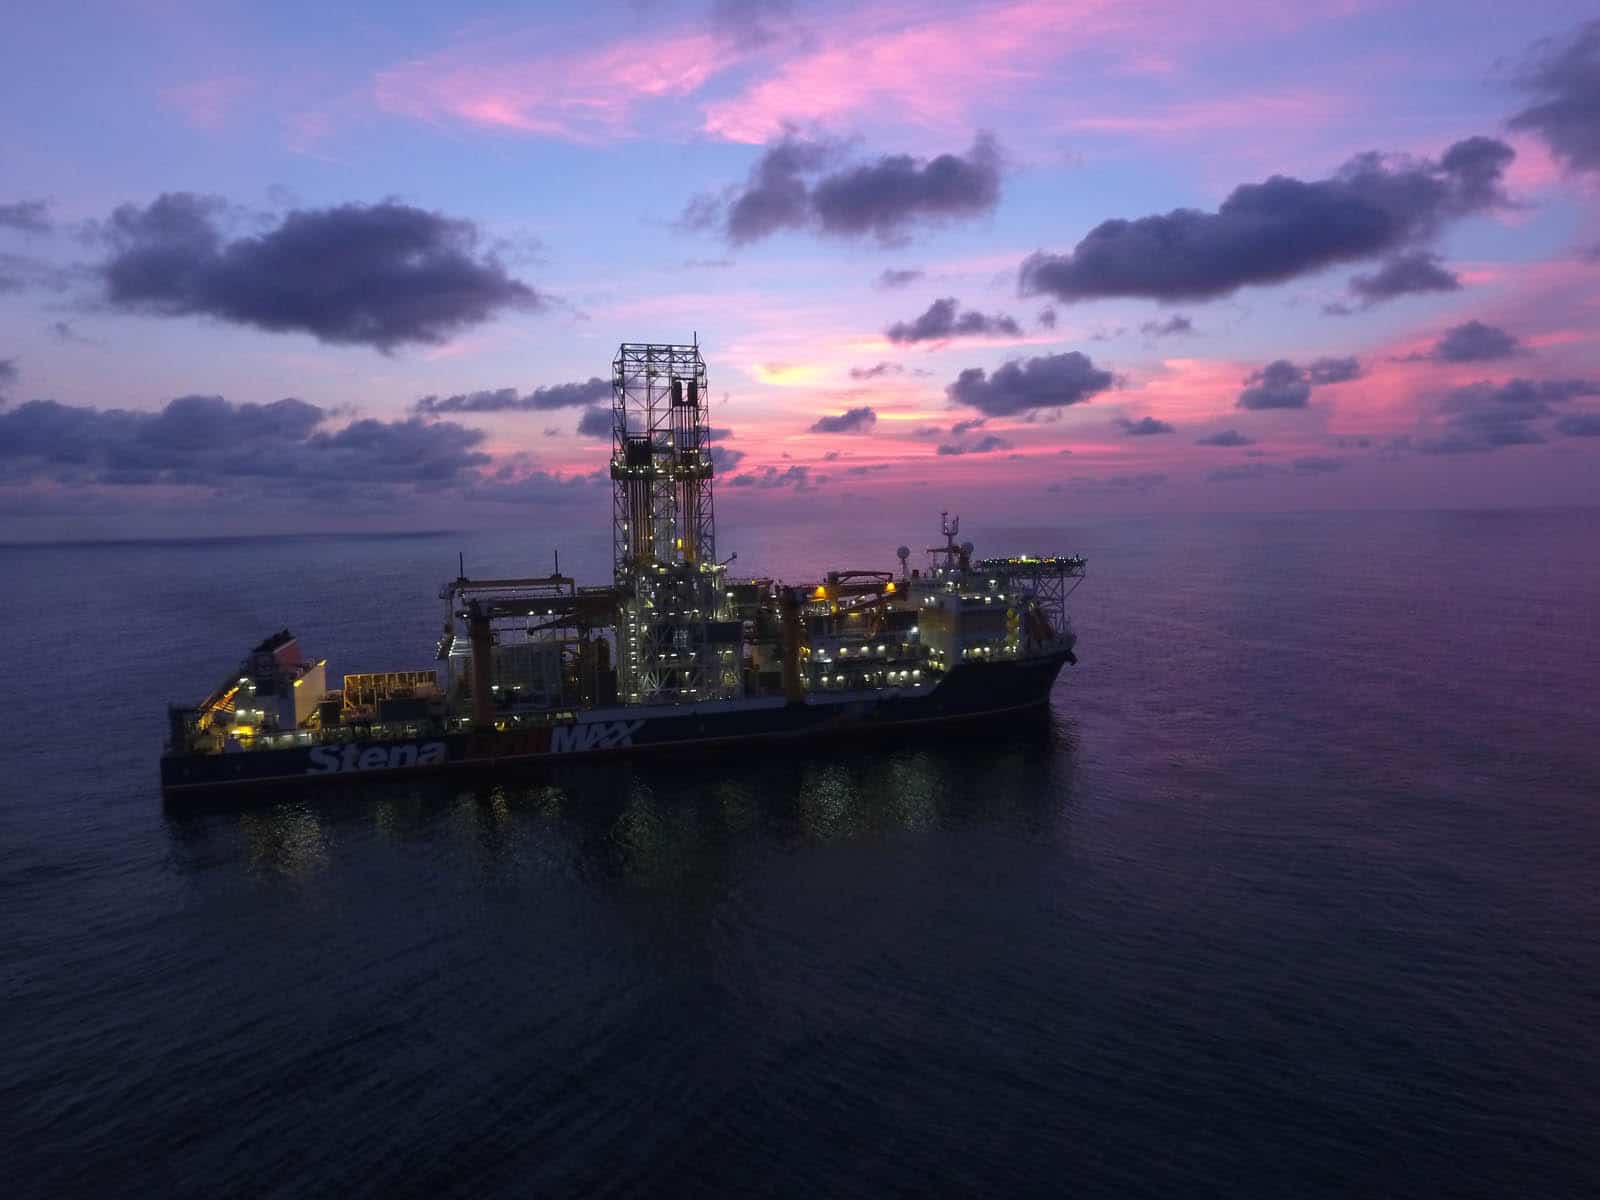 Drillship with pink and violet skies